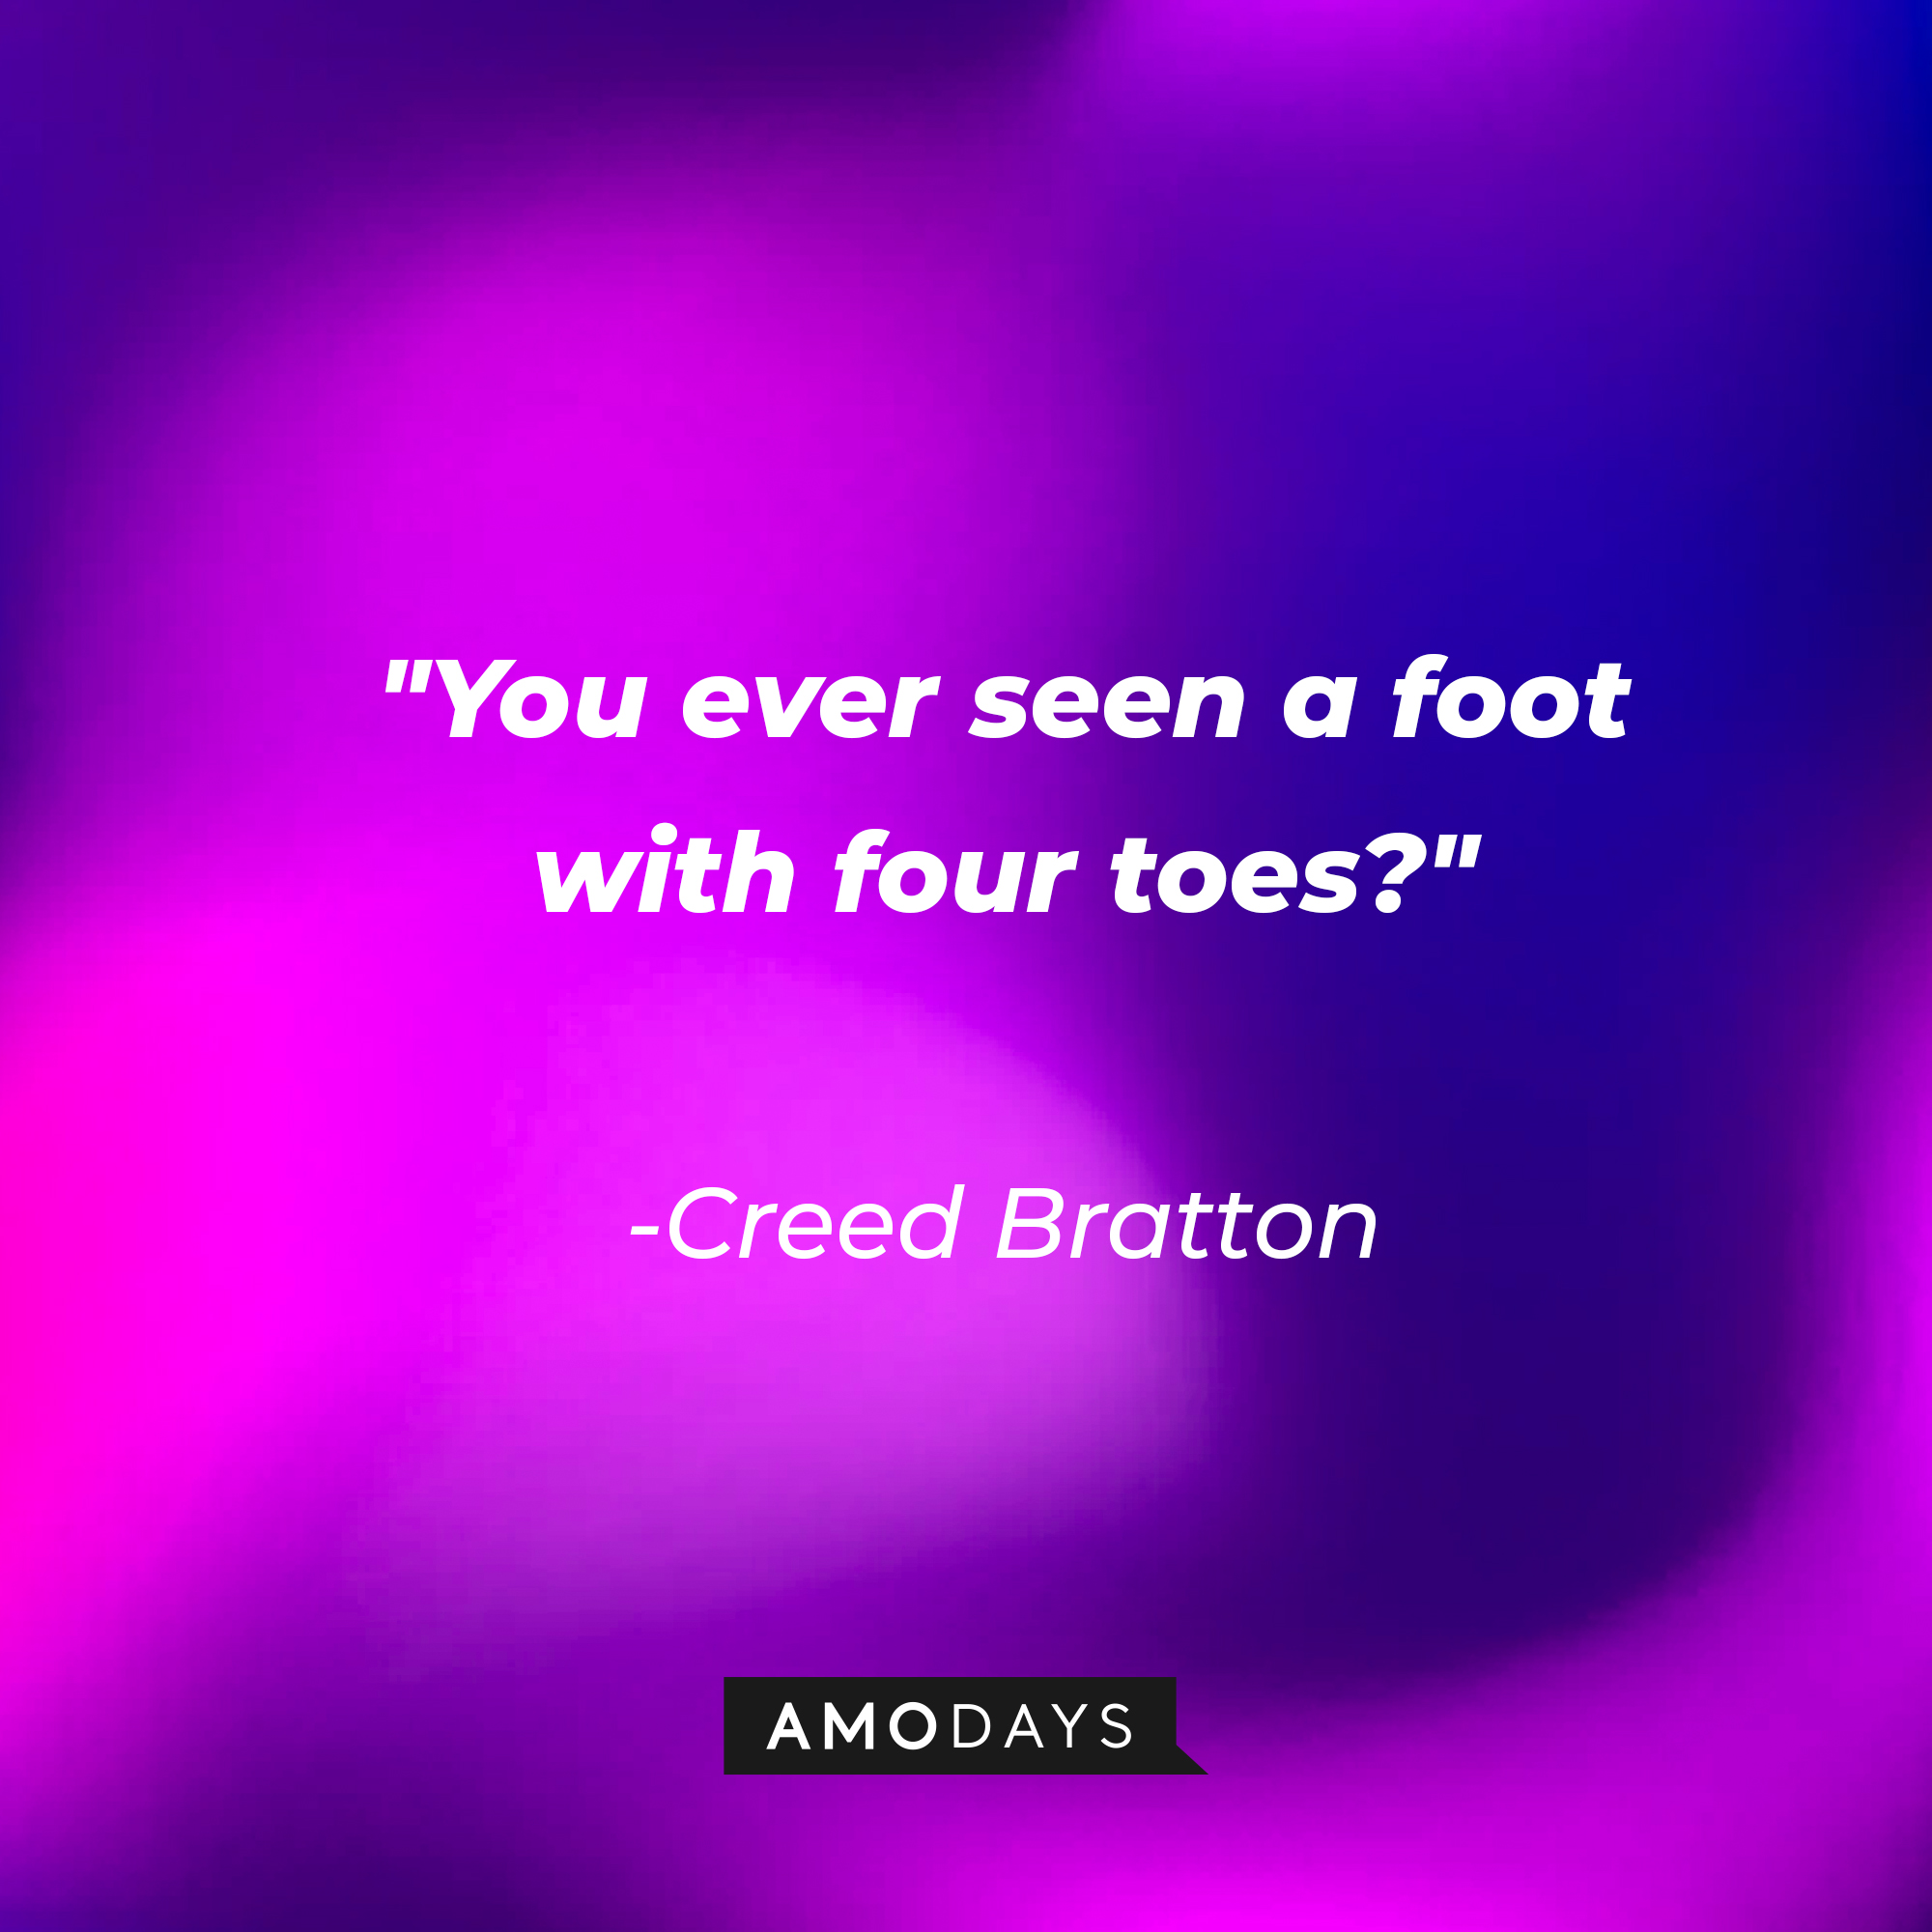 Creed Bratton's quote: "You ever seen a foot with four toes?" | Source: AmoDays